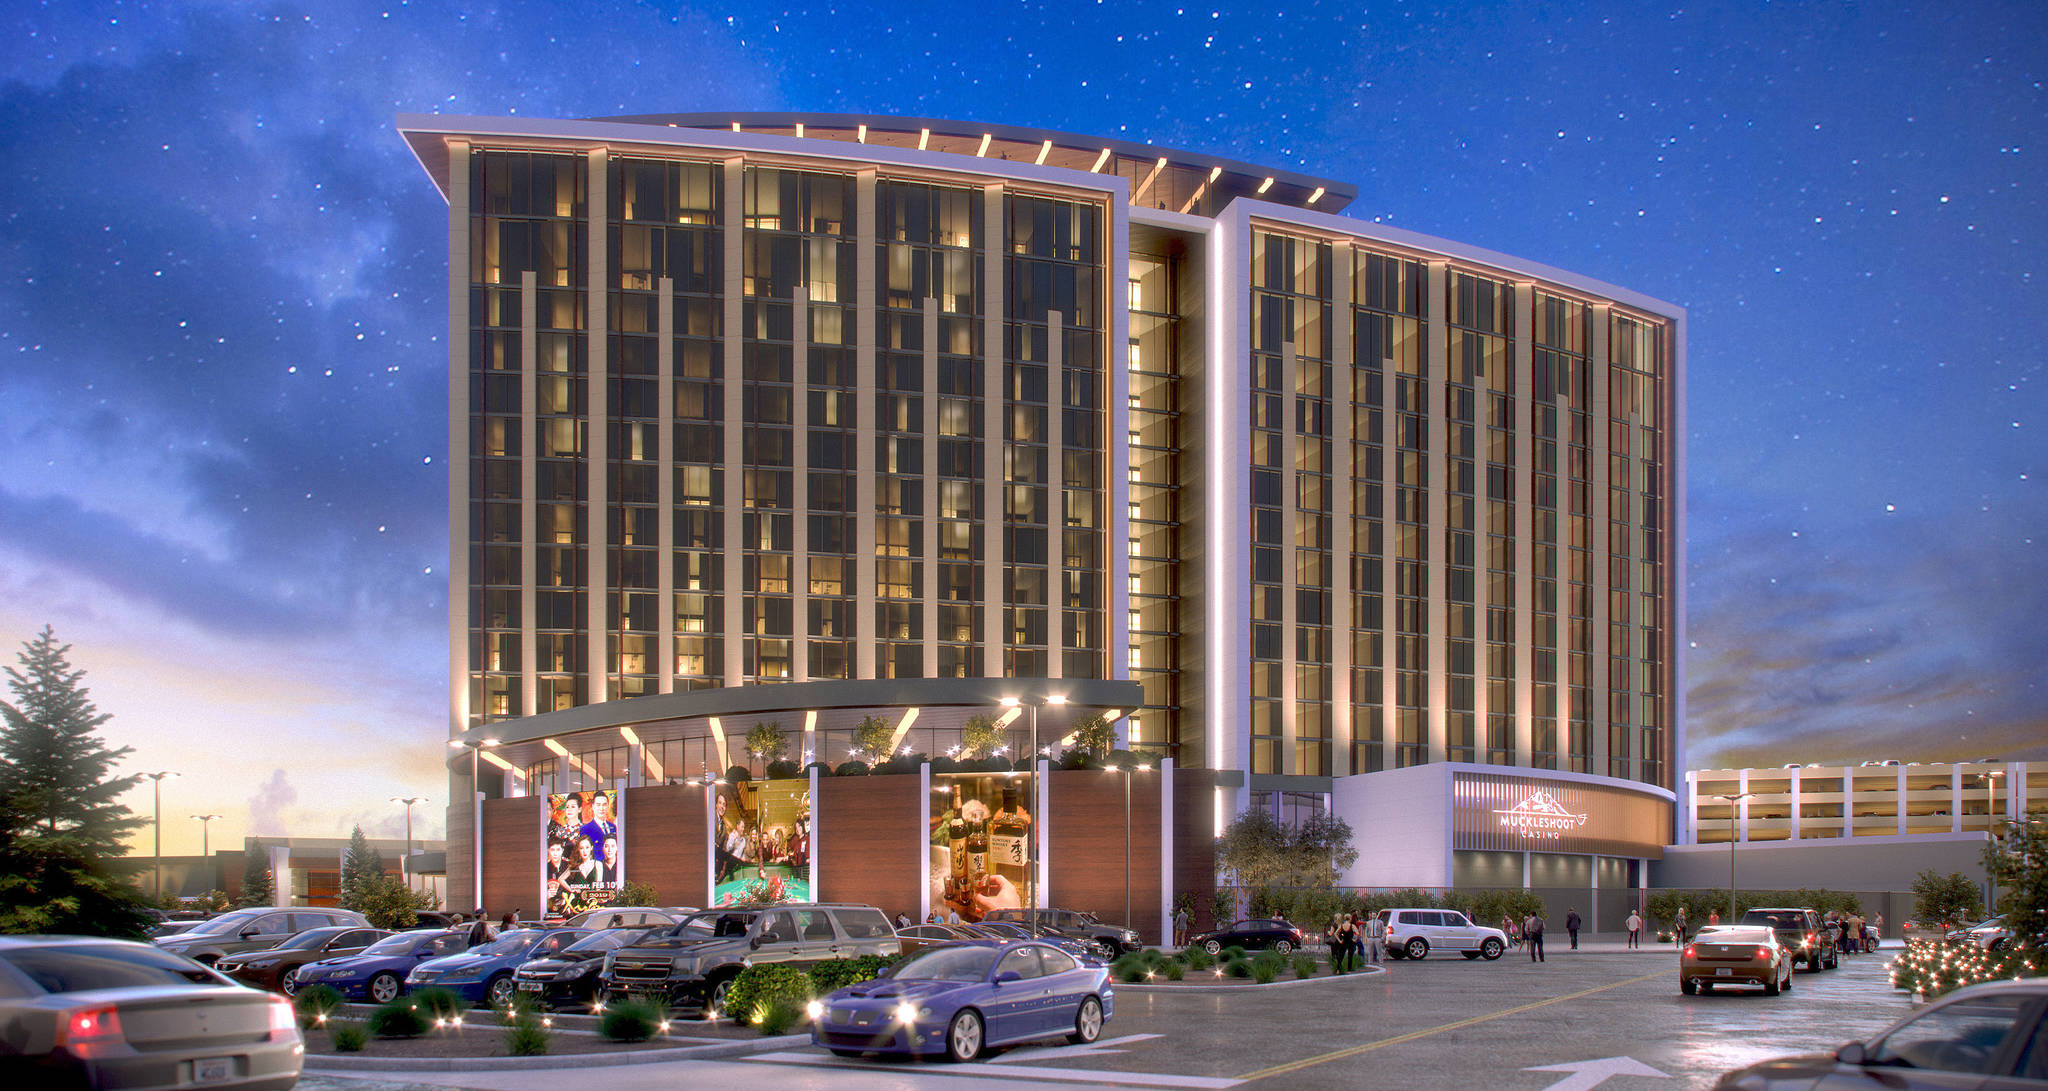 Muckleshoot Indian Tribe to develop luxury hotel at Auburn casino